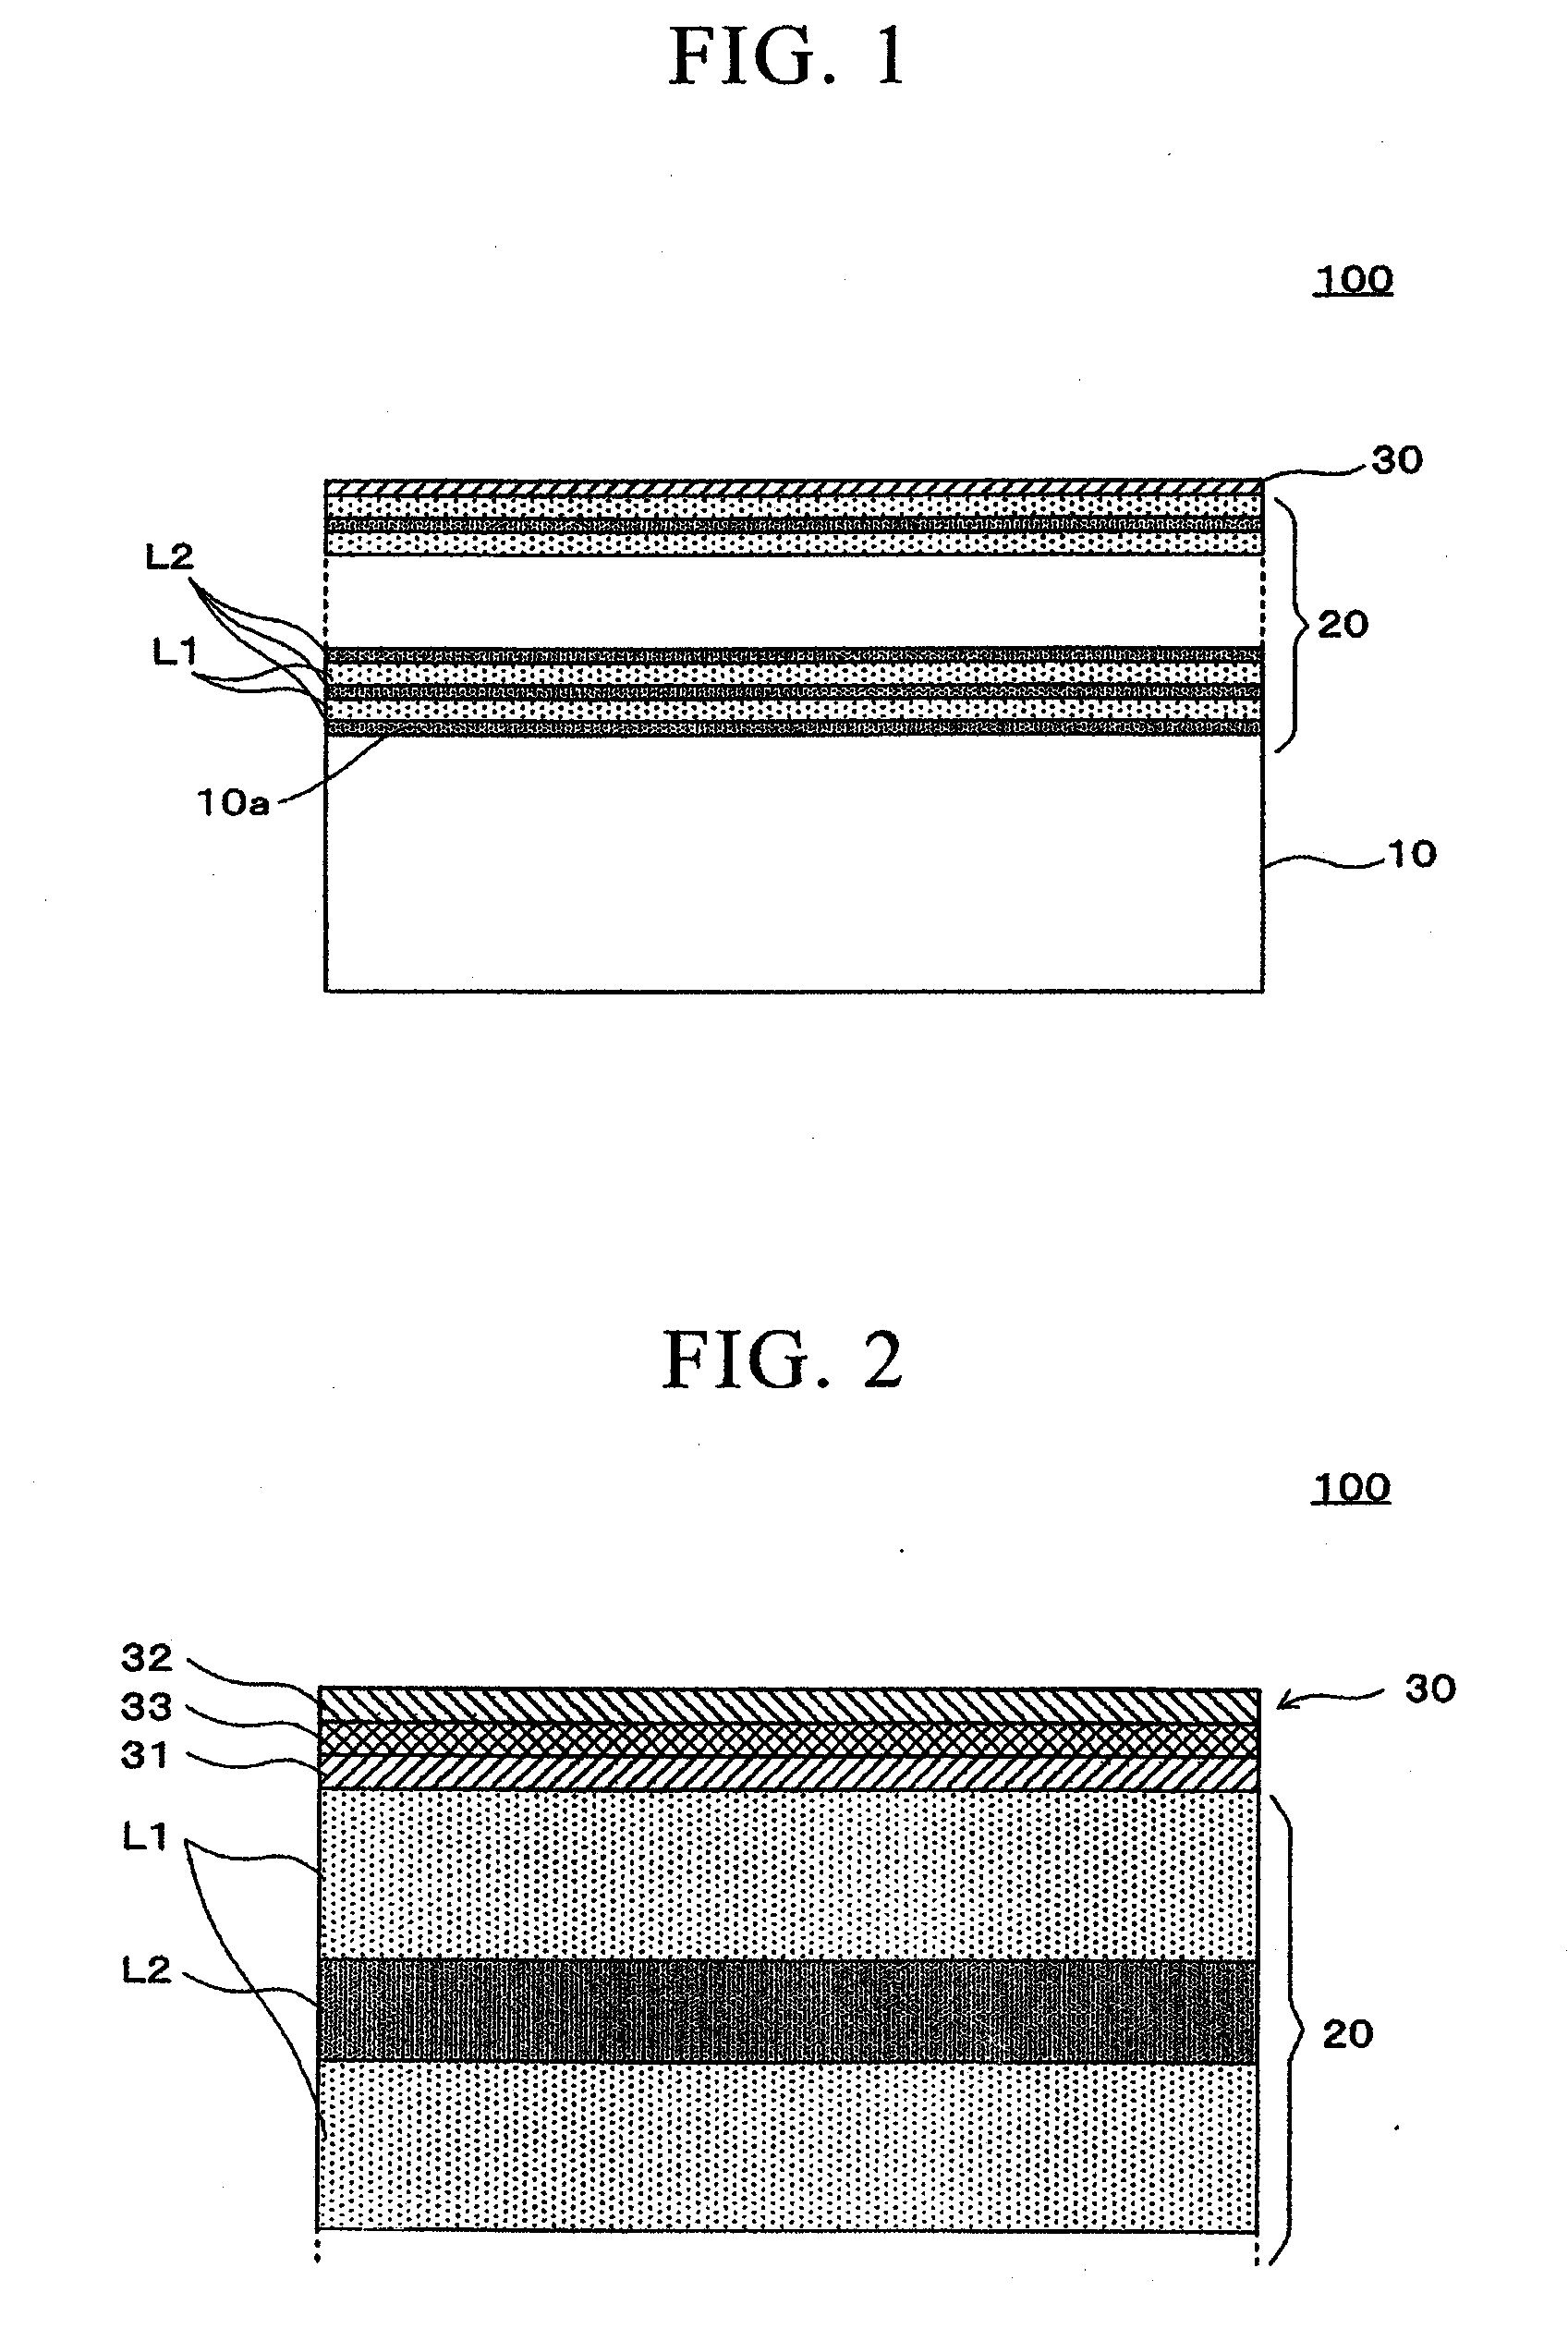 Optical element, exposure apparatus using this, and device manufacturing method